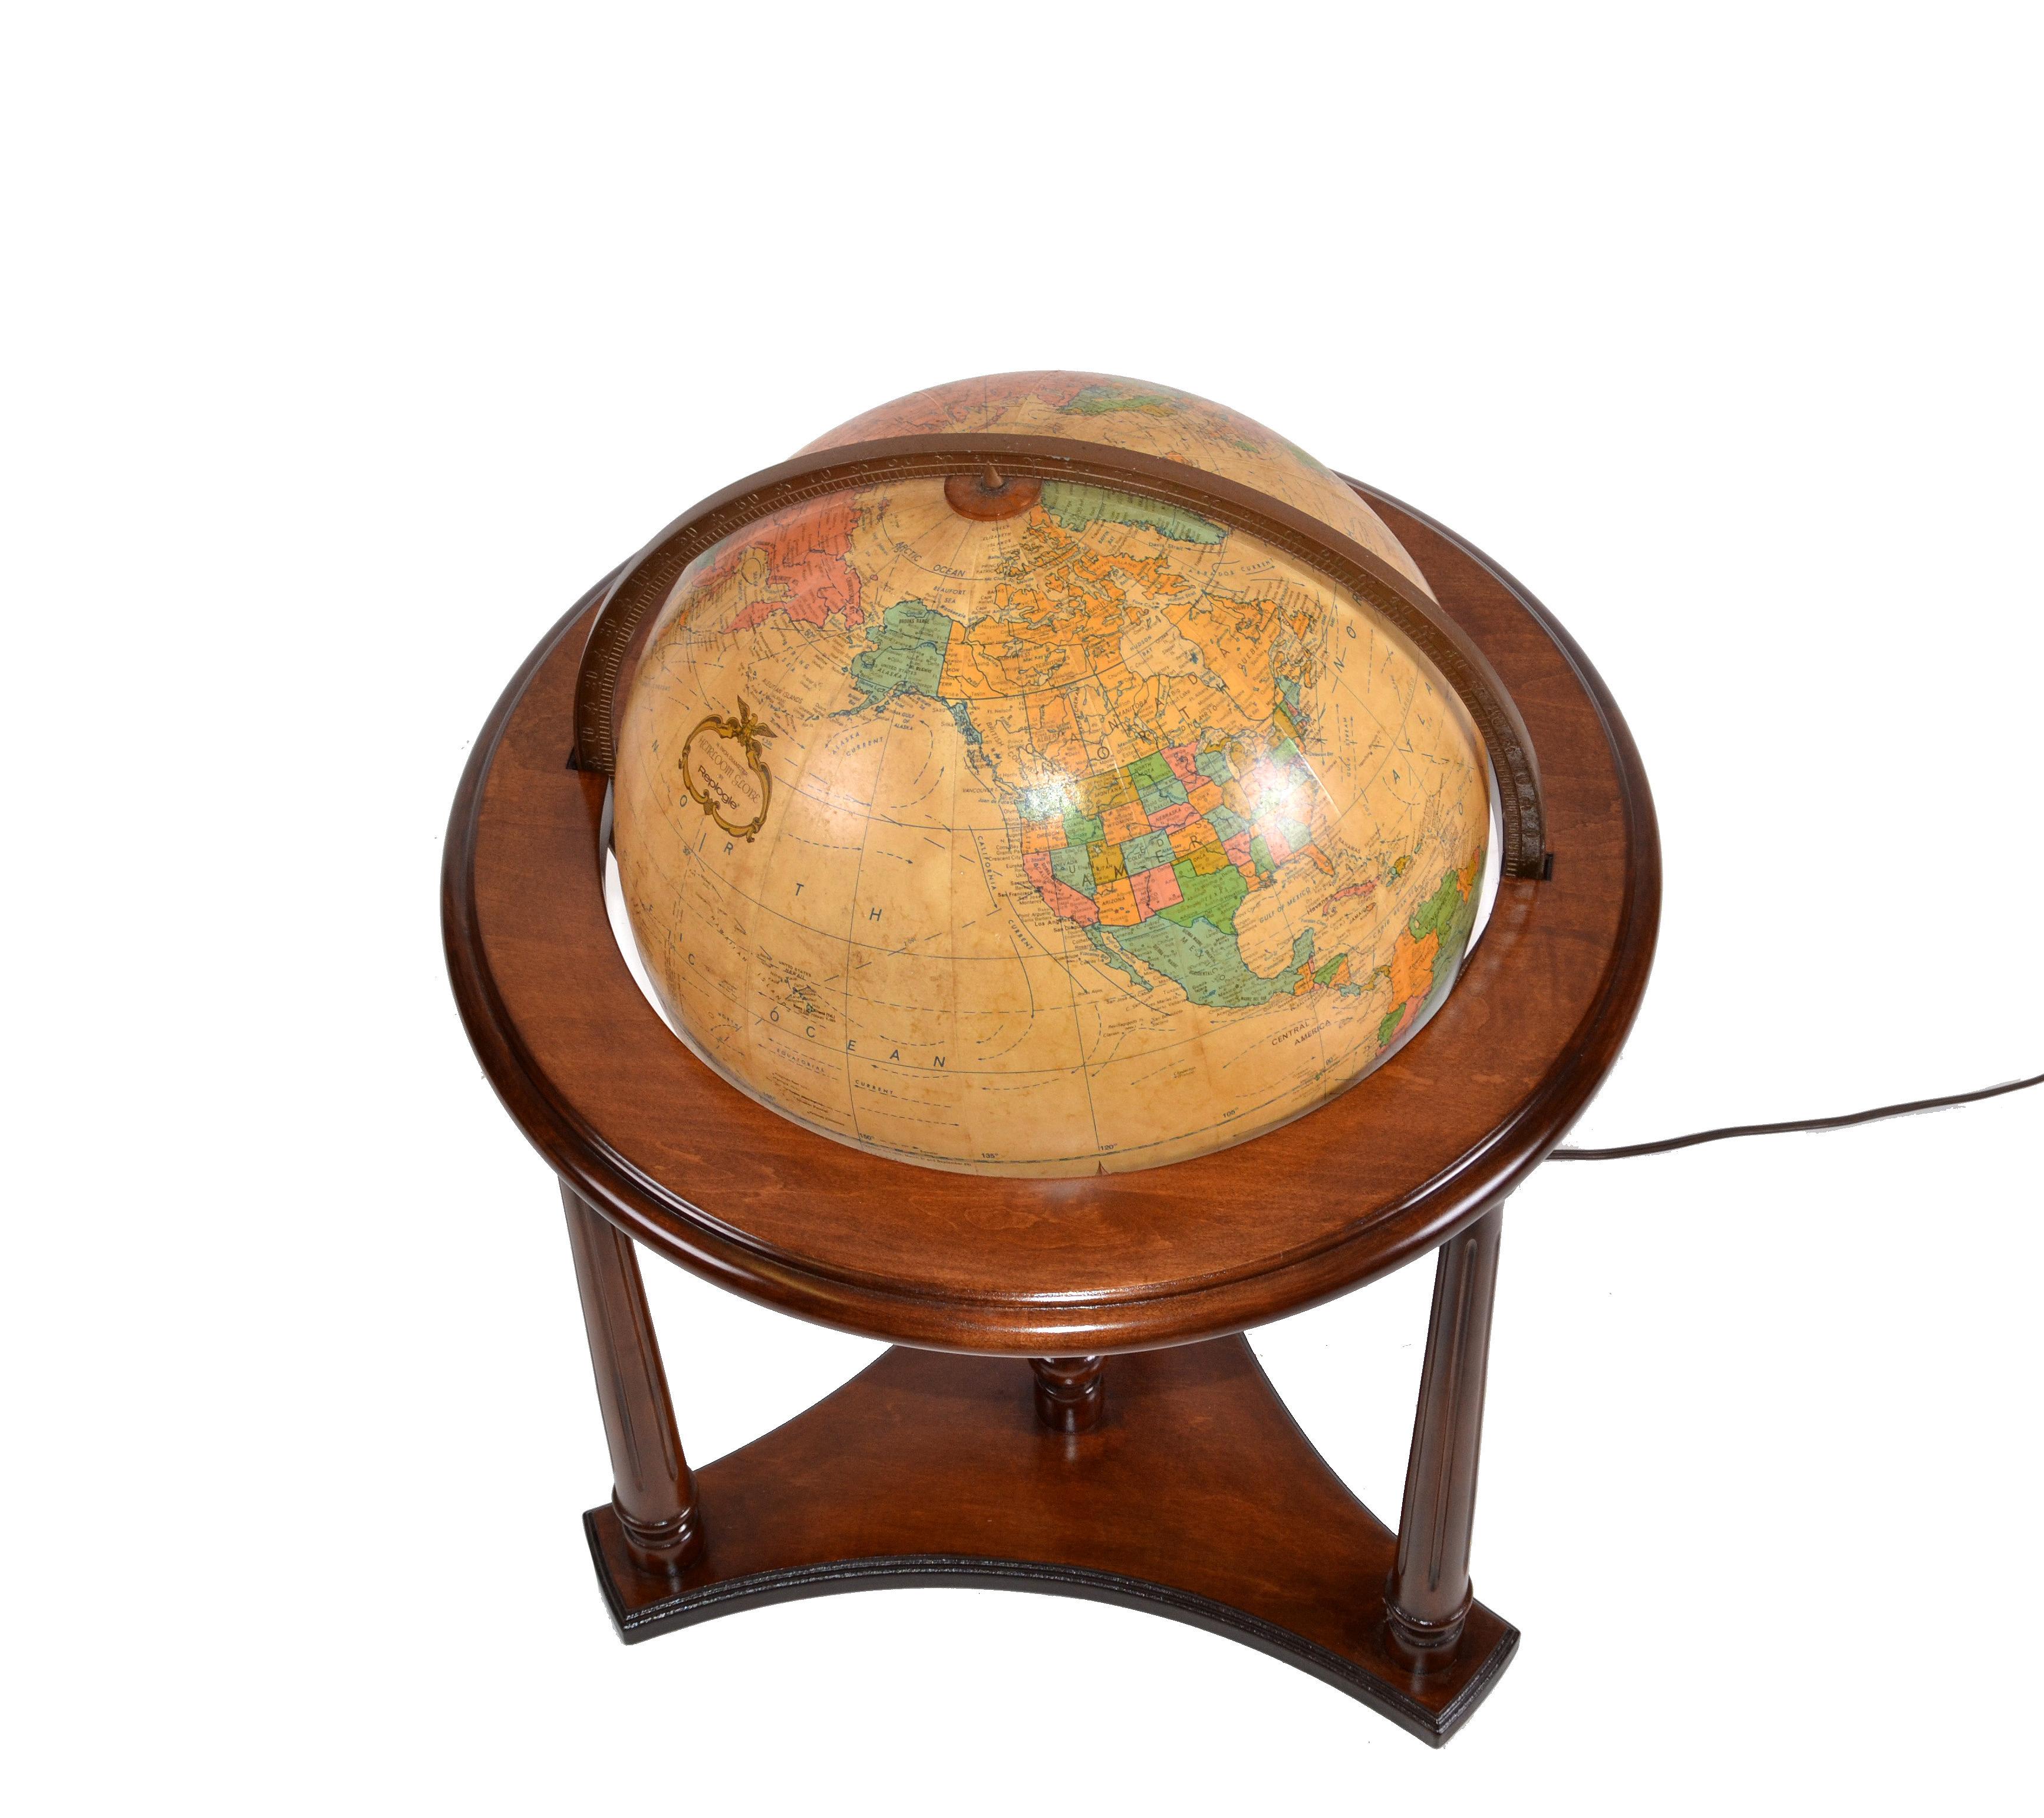 Restored 1960s Replogle Illuminated glass globe on a dark brown walnut stand.
Globe features a Parchment paper map over glass and has a full 360 degree turning function.
Is in perfect working condition and has a switch in between the cord.
Marked